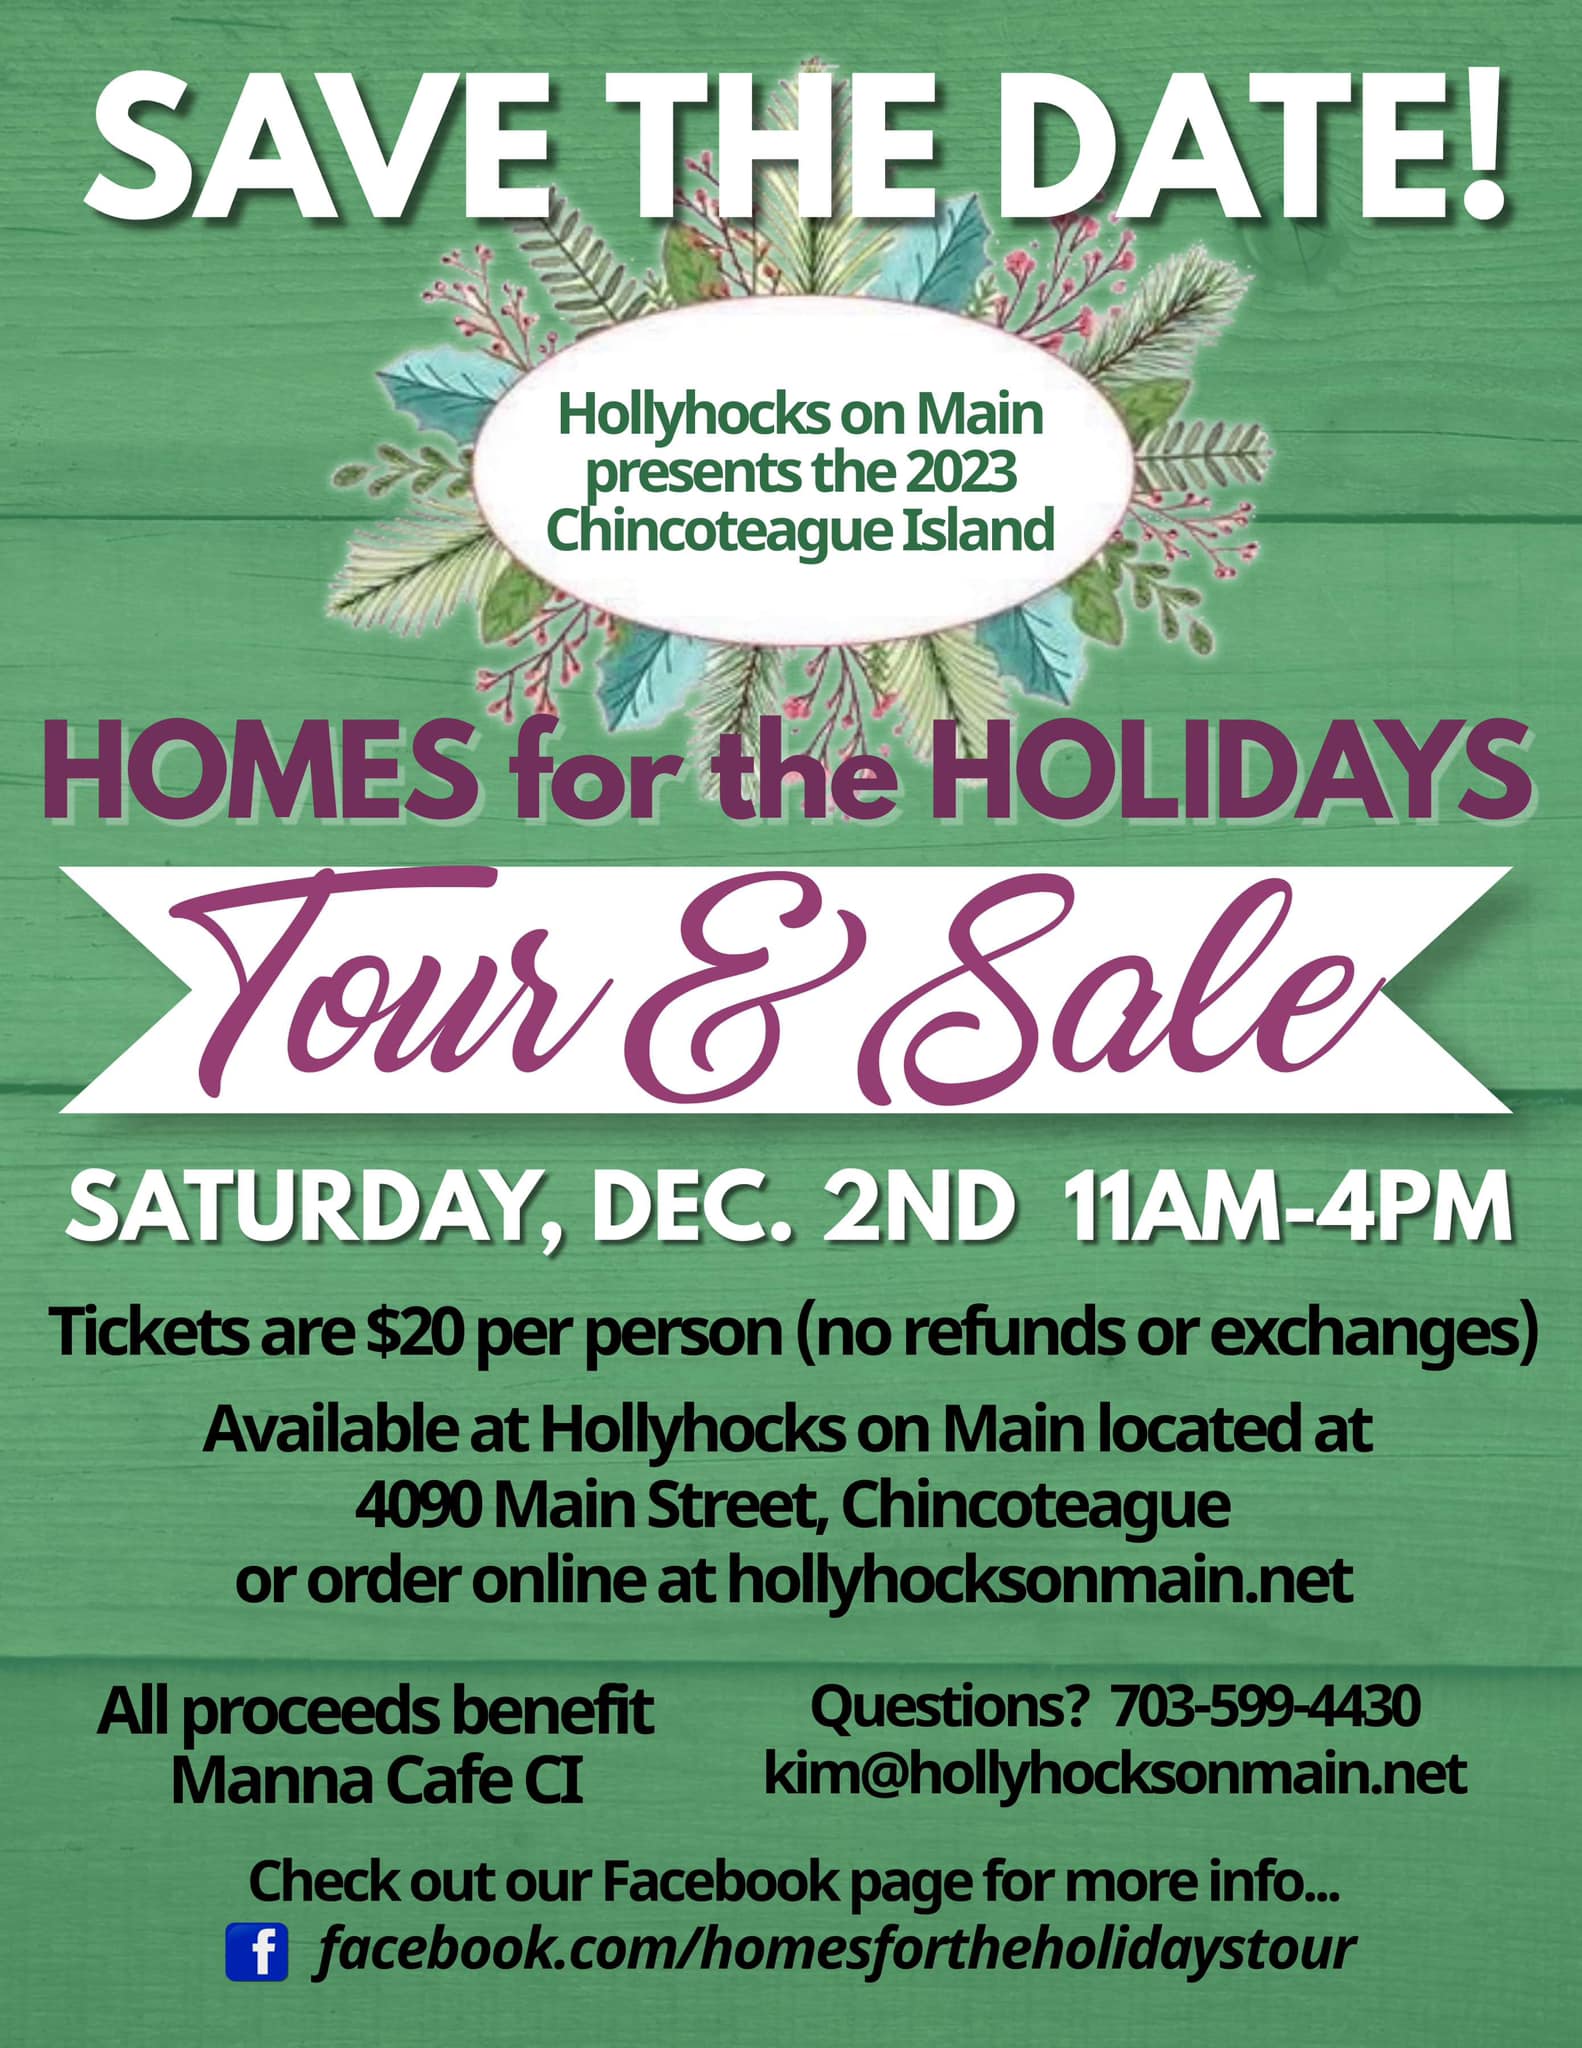 Homes for the Holidays tour and sale on Sat., Dec 2 11a-4p.